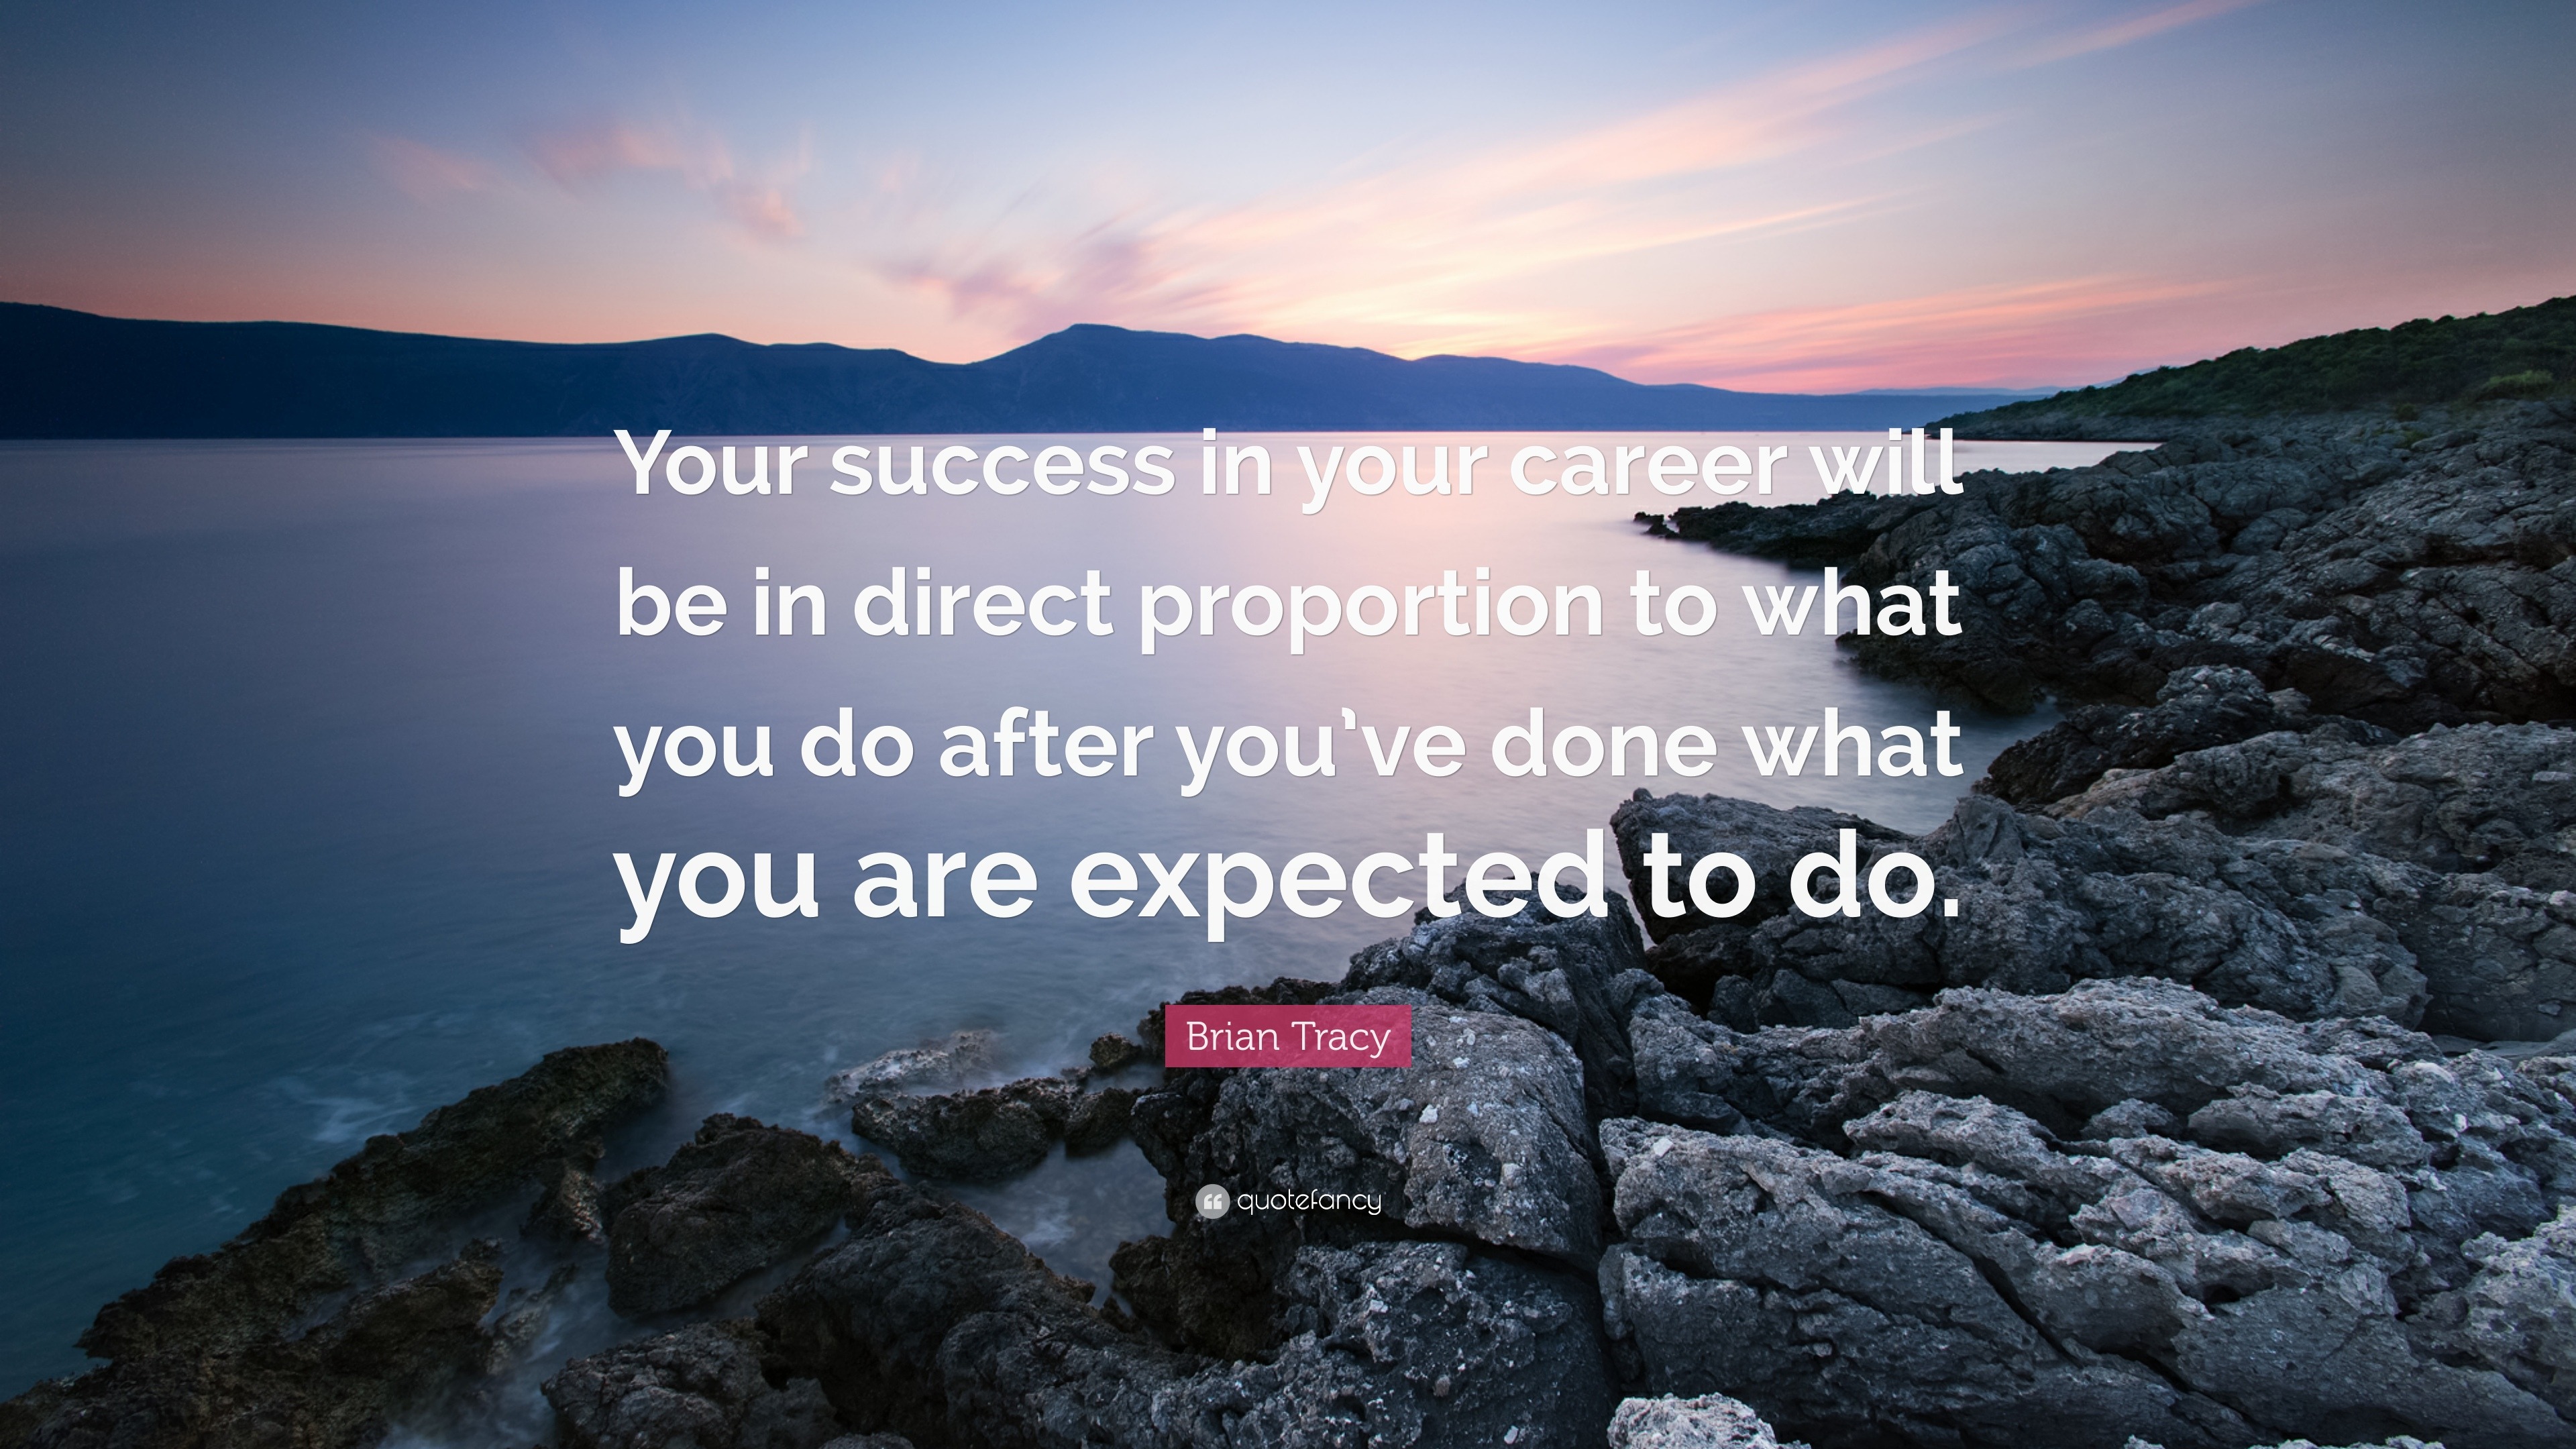 Brian Tracy Quote: “Your success in your career will be in direct ...